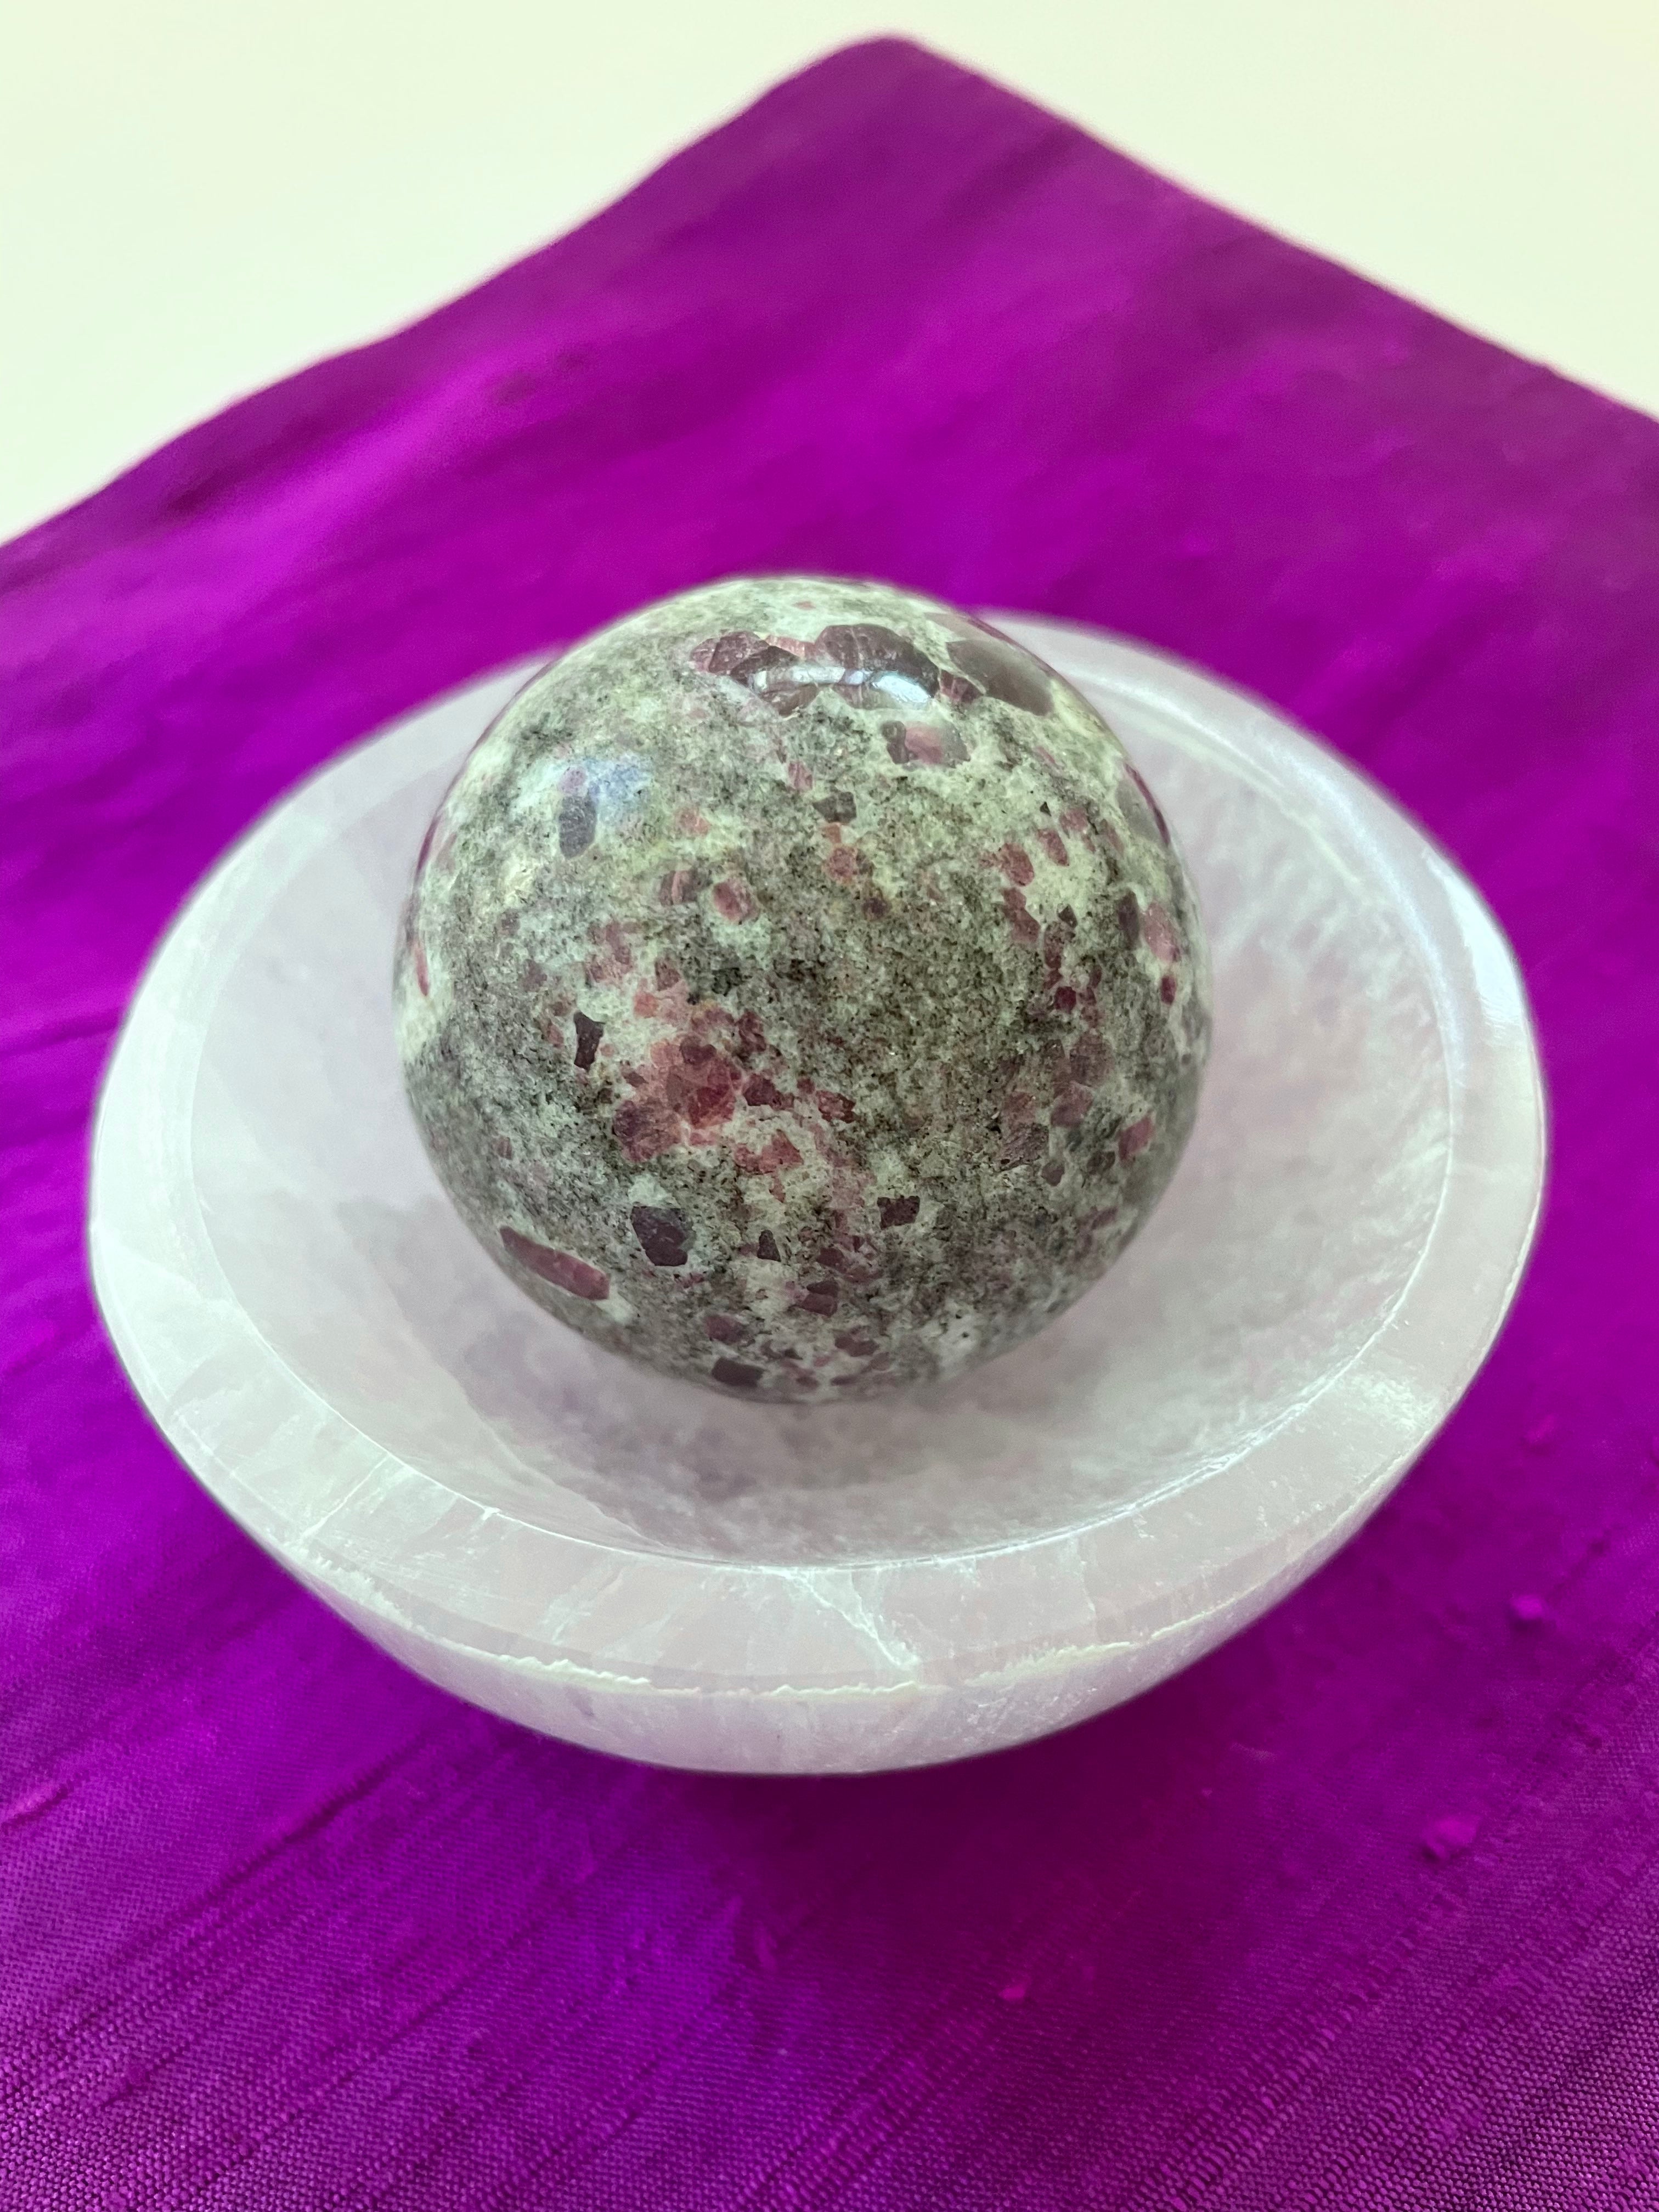 Alternate view. Ruby in matrix sphere is perfect for your altar, for meditation, as décor in your home or office. It consists of rubies set in their natural stone matrix. Ruby balances the heart, increases energy levels. It is a stone of love and passion and sexuality. It protects against psychic attack. It is a stone of prosperity and helps you to draw in abundance and maintain wealth. It enhances courage and leadership. This sphere weighs 5.2 oz. and is approximately 6" in circumference. $38.00.